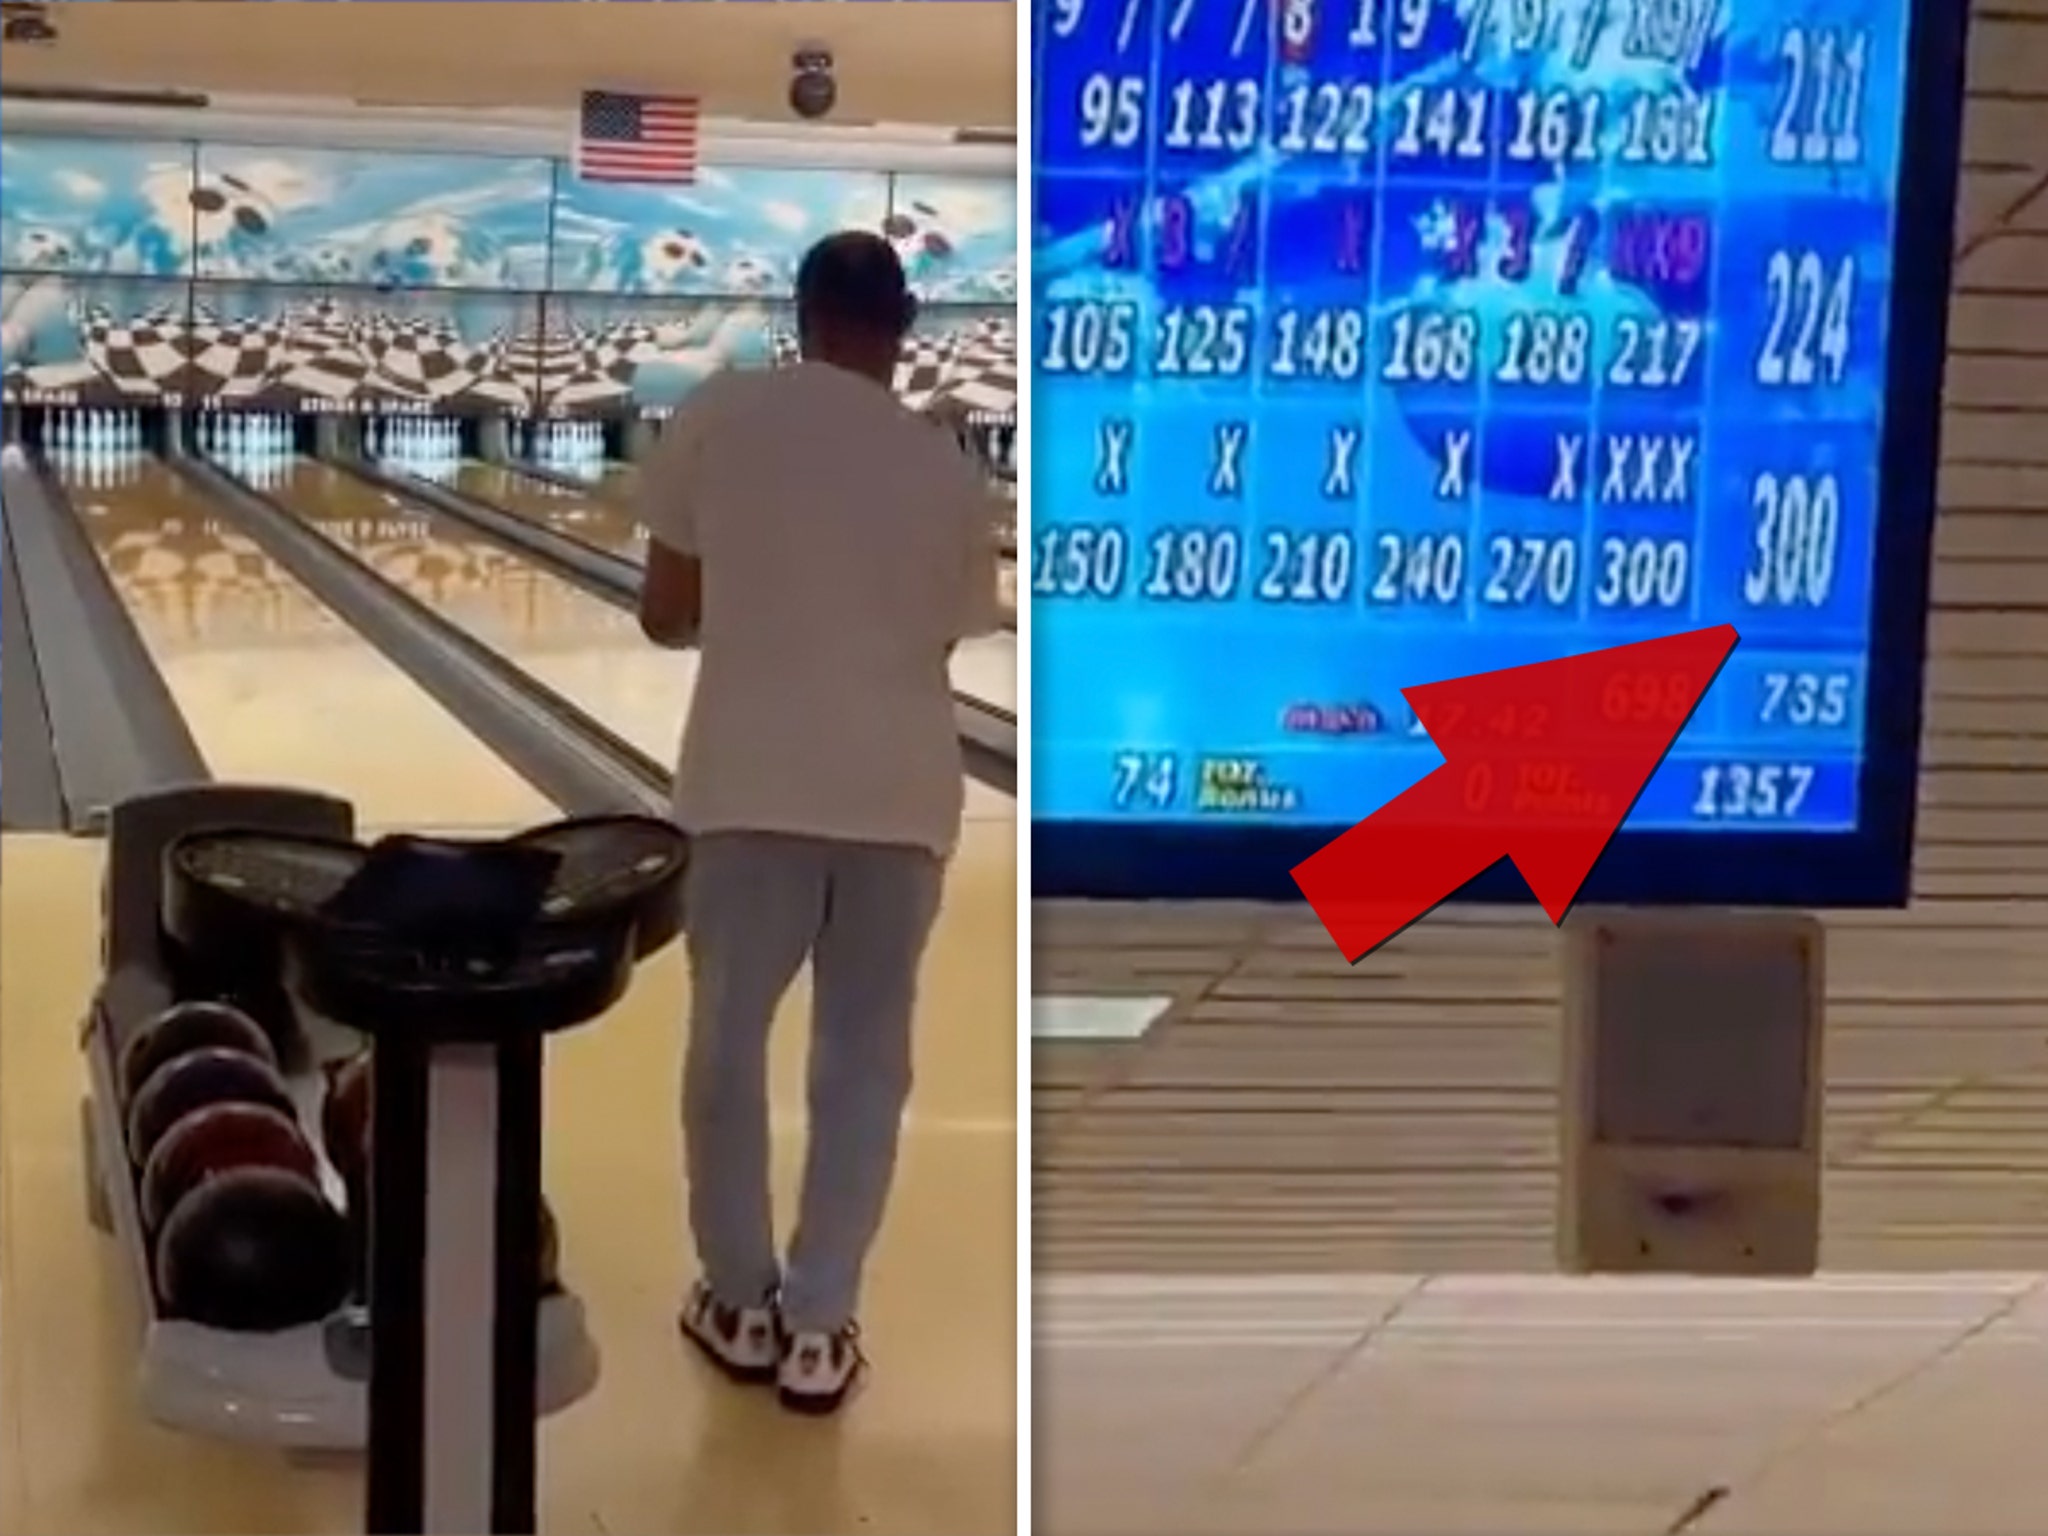 WATCH: Red Sox outfielder Mookie Betts bowls a perfect 300 at the